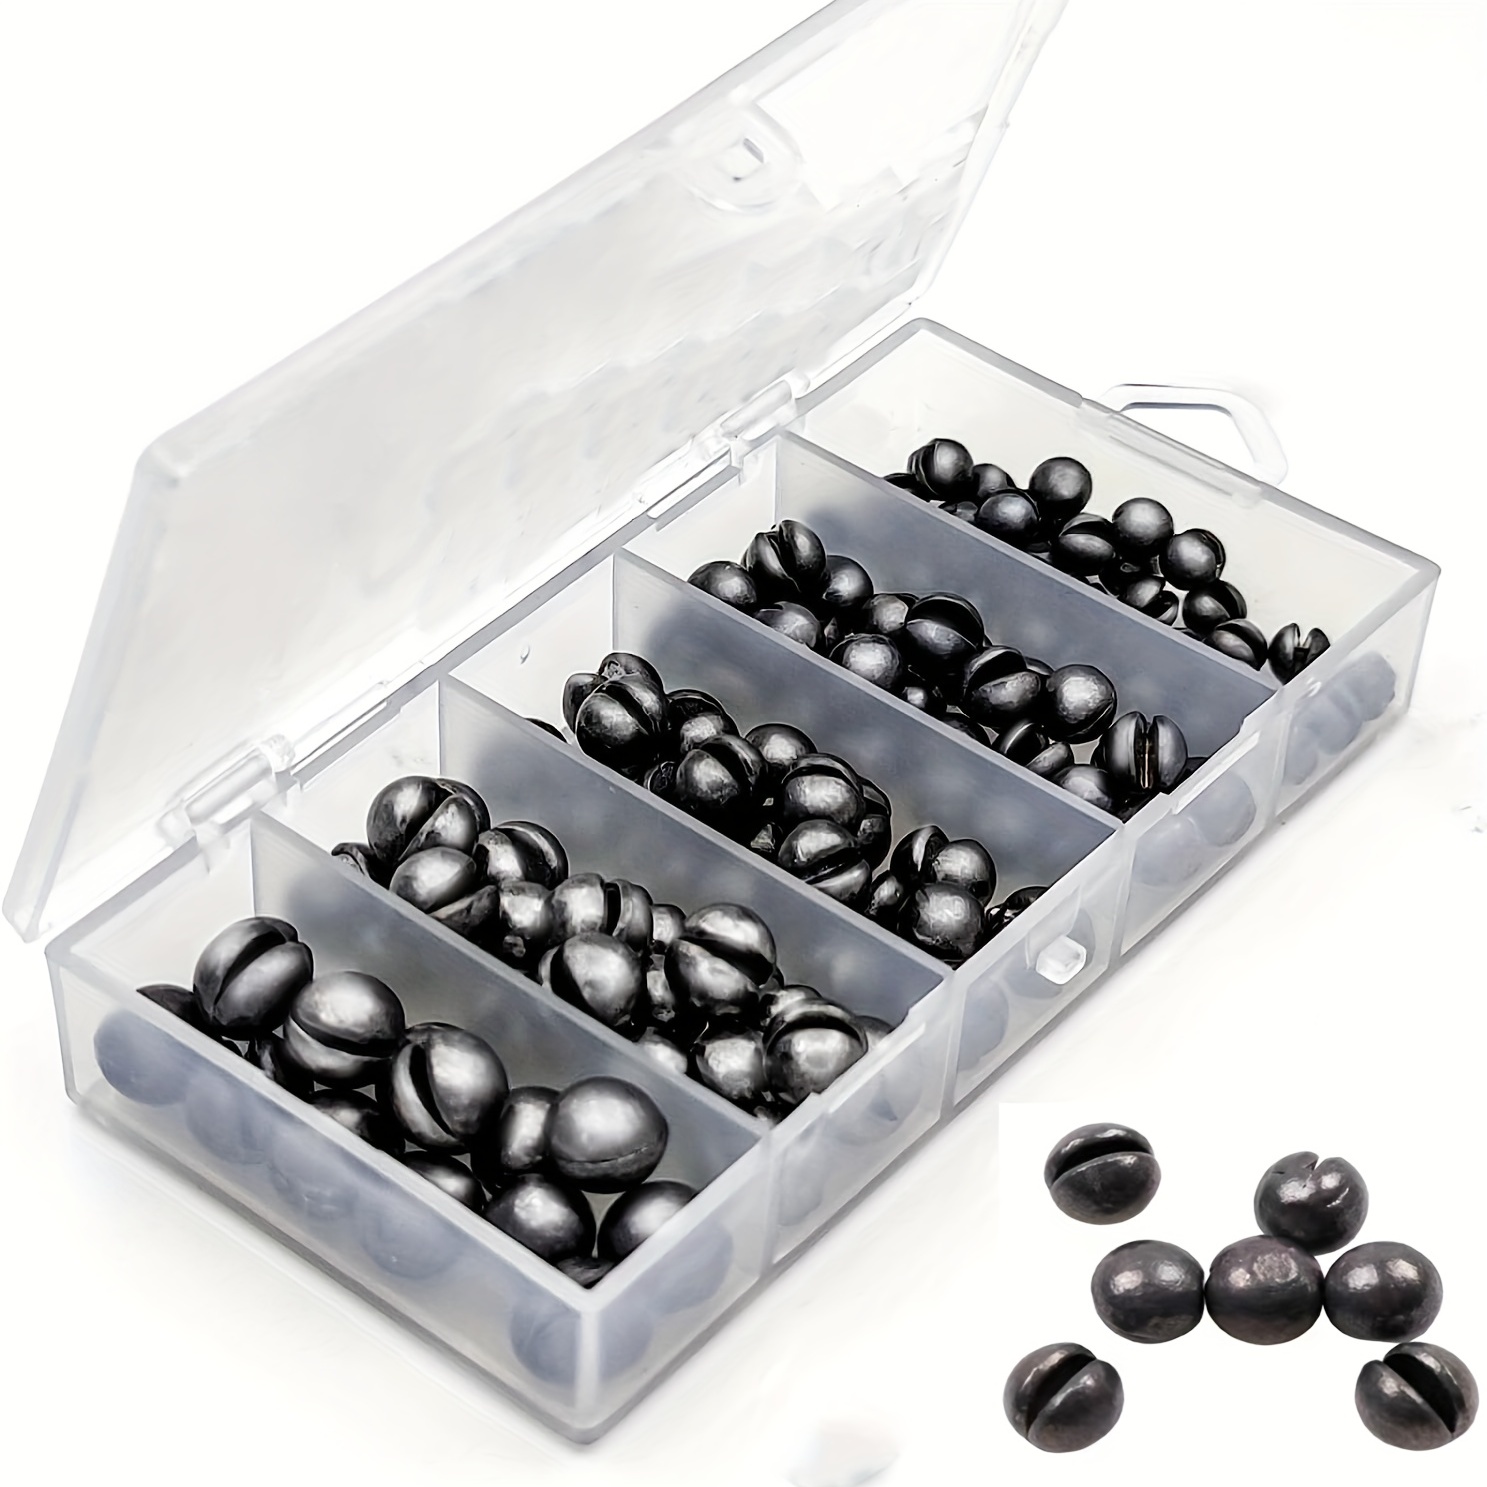 100PCS Fishing Weights Sinkers: 5 Sizes, Including  0.06/0.05/0.04/0.02/0.01ounce (small) - Premium Quality Split Shot Fishing  Weights!